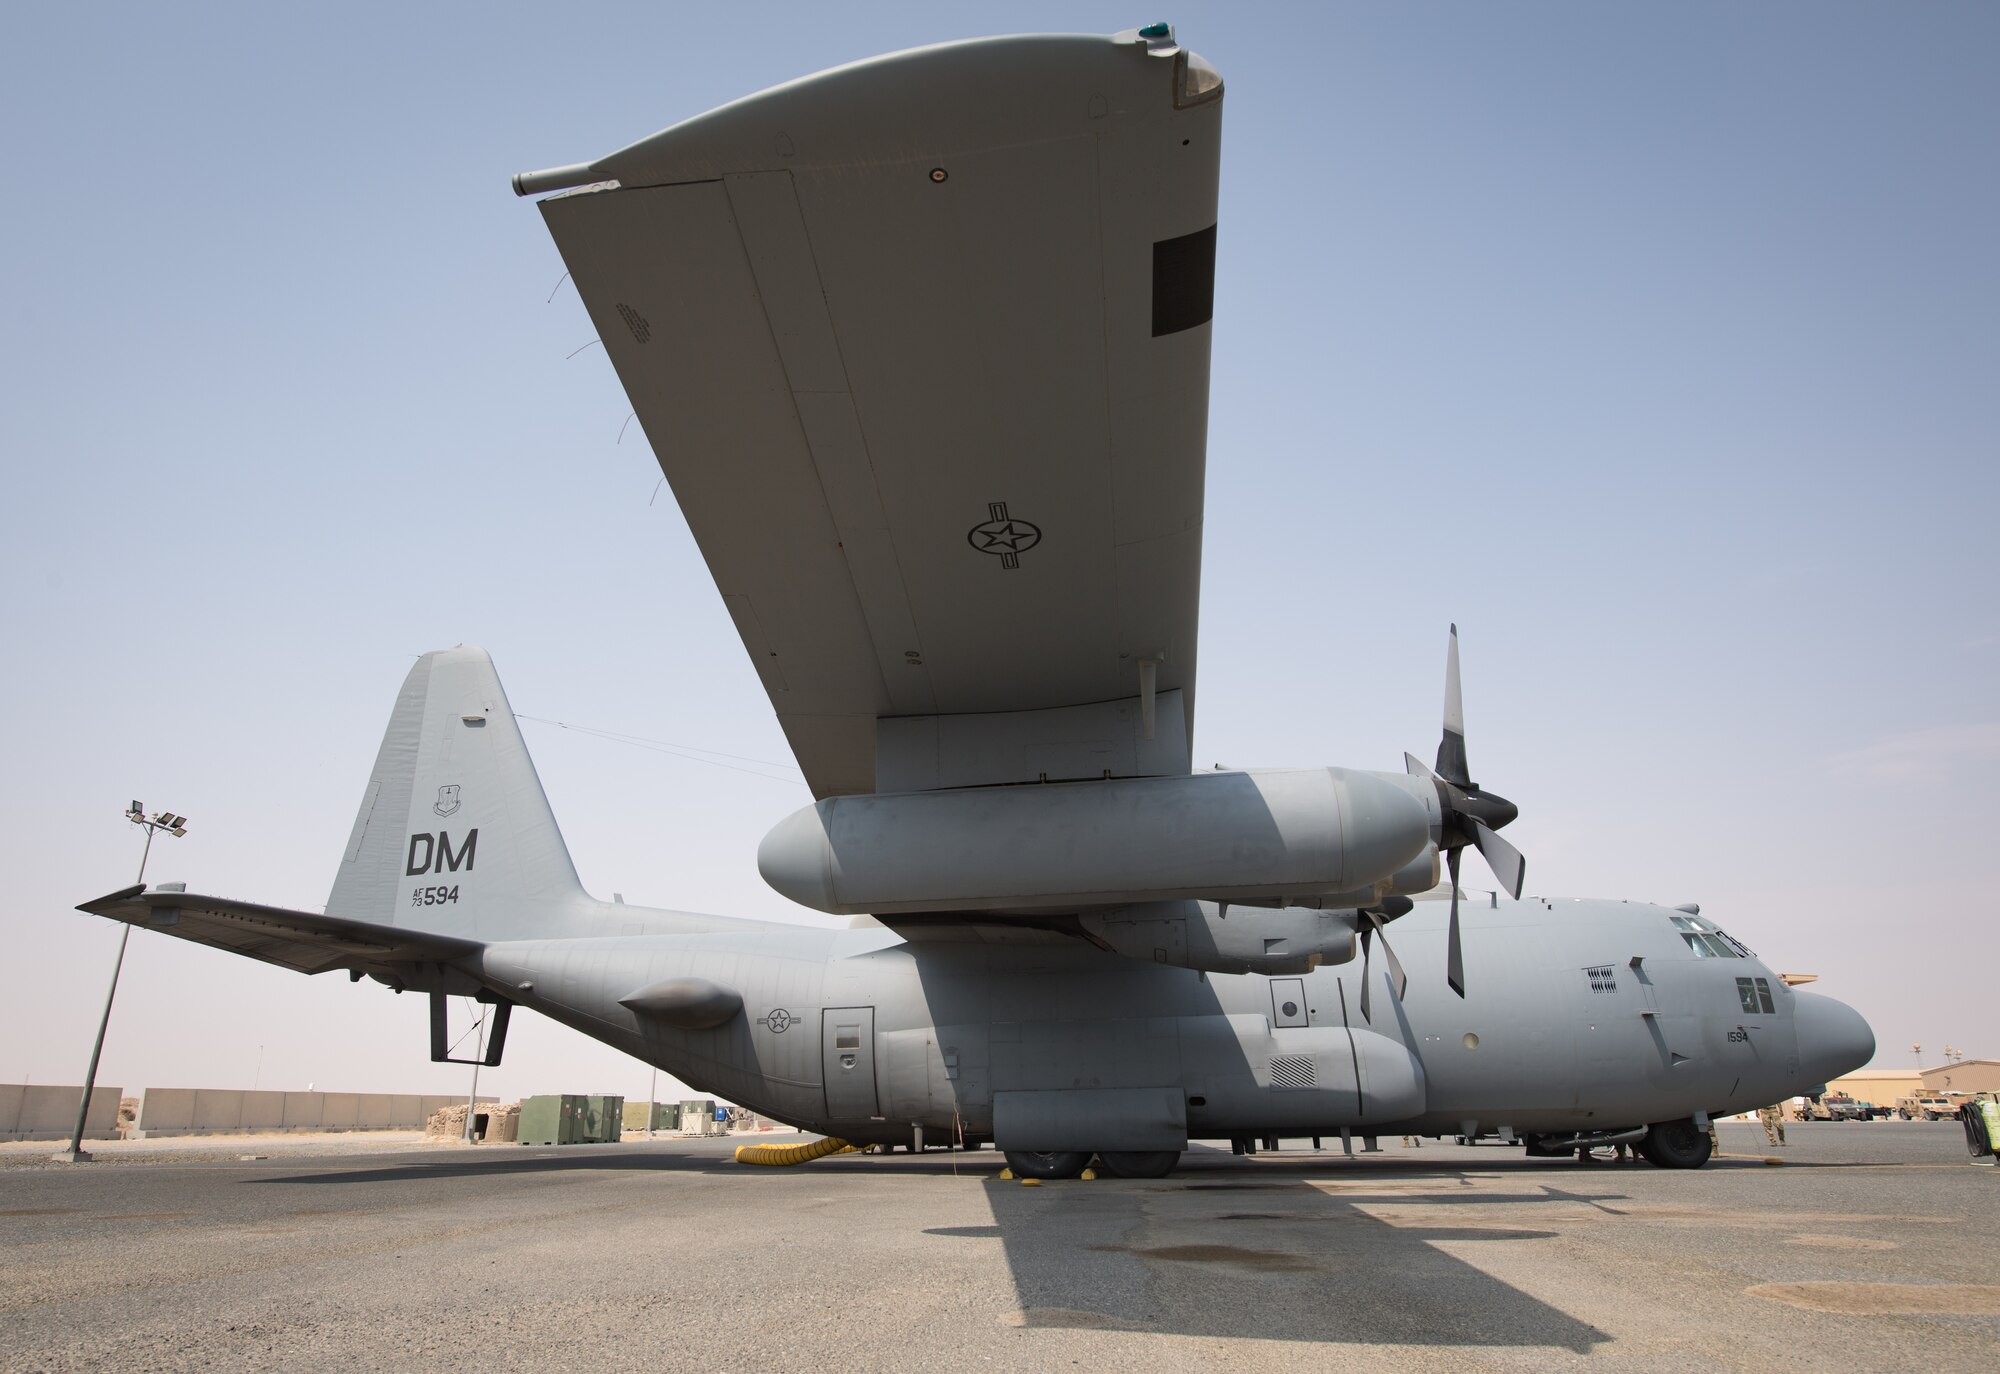 A U.S. Air Force EC-130H Compass Call aircraft awaits departure at Ali Al Salem Air Base, Kuwait, Oct. 2, 2019. The aircraft's departure coincides with the inactivation of the 43rd Expeditionary Electronic Combat Squadron on Sept. 30, 2019. (U.S. Air Force photo by Tech. Sgt. Daniel Martinez)